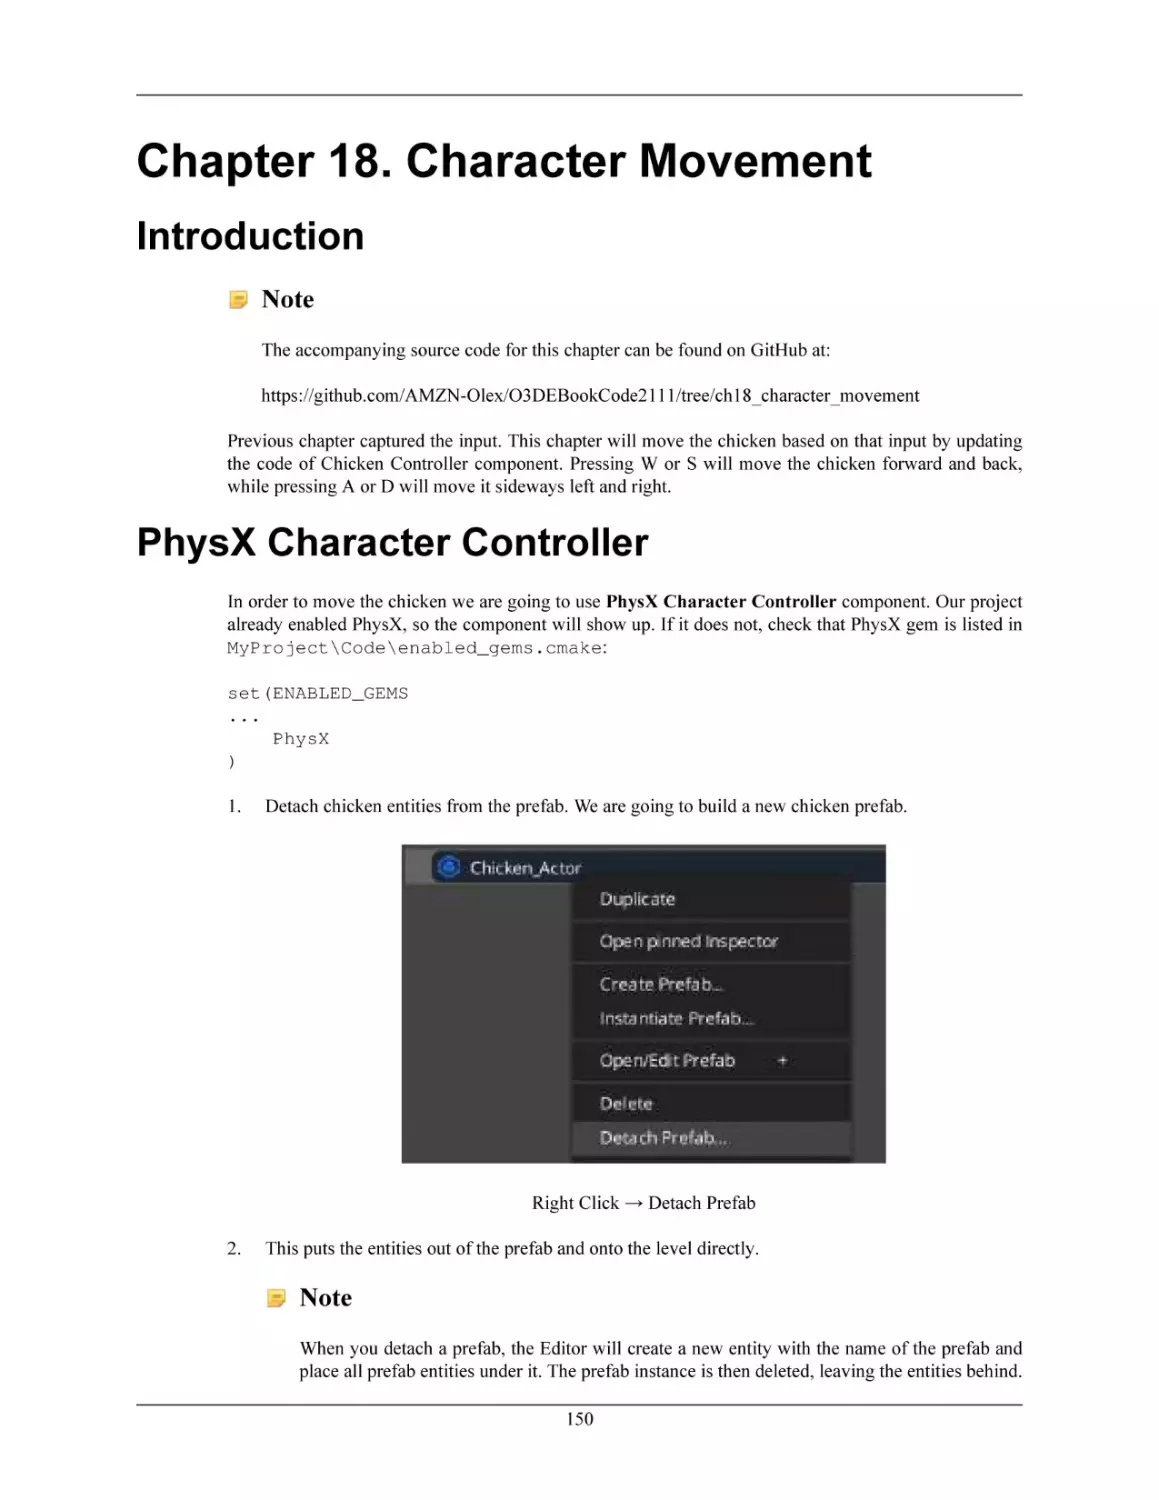 Chapter 18. Character Movement
Introduction
PhysX Character Controller